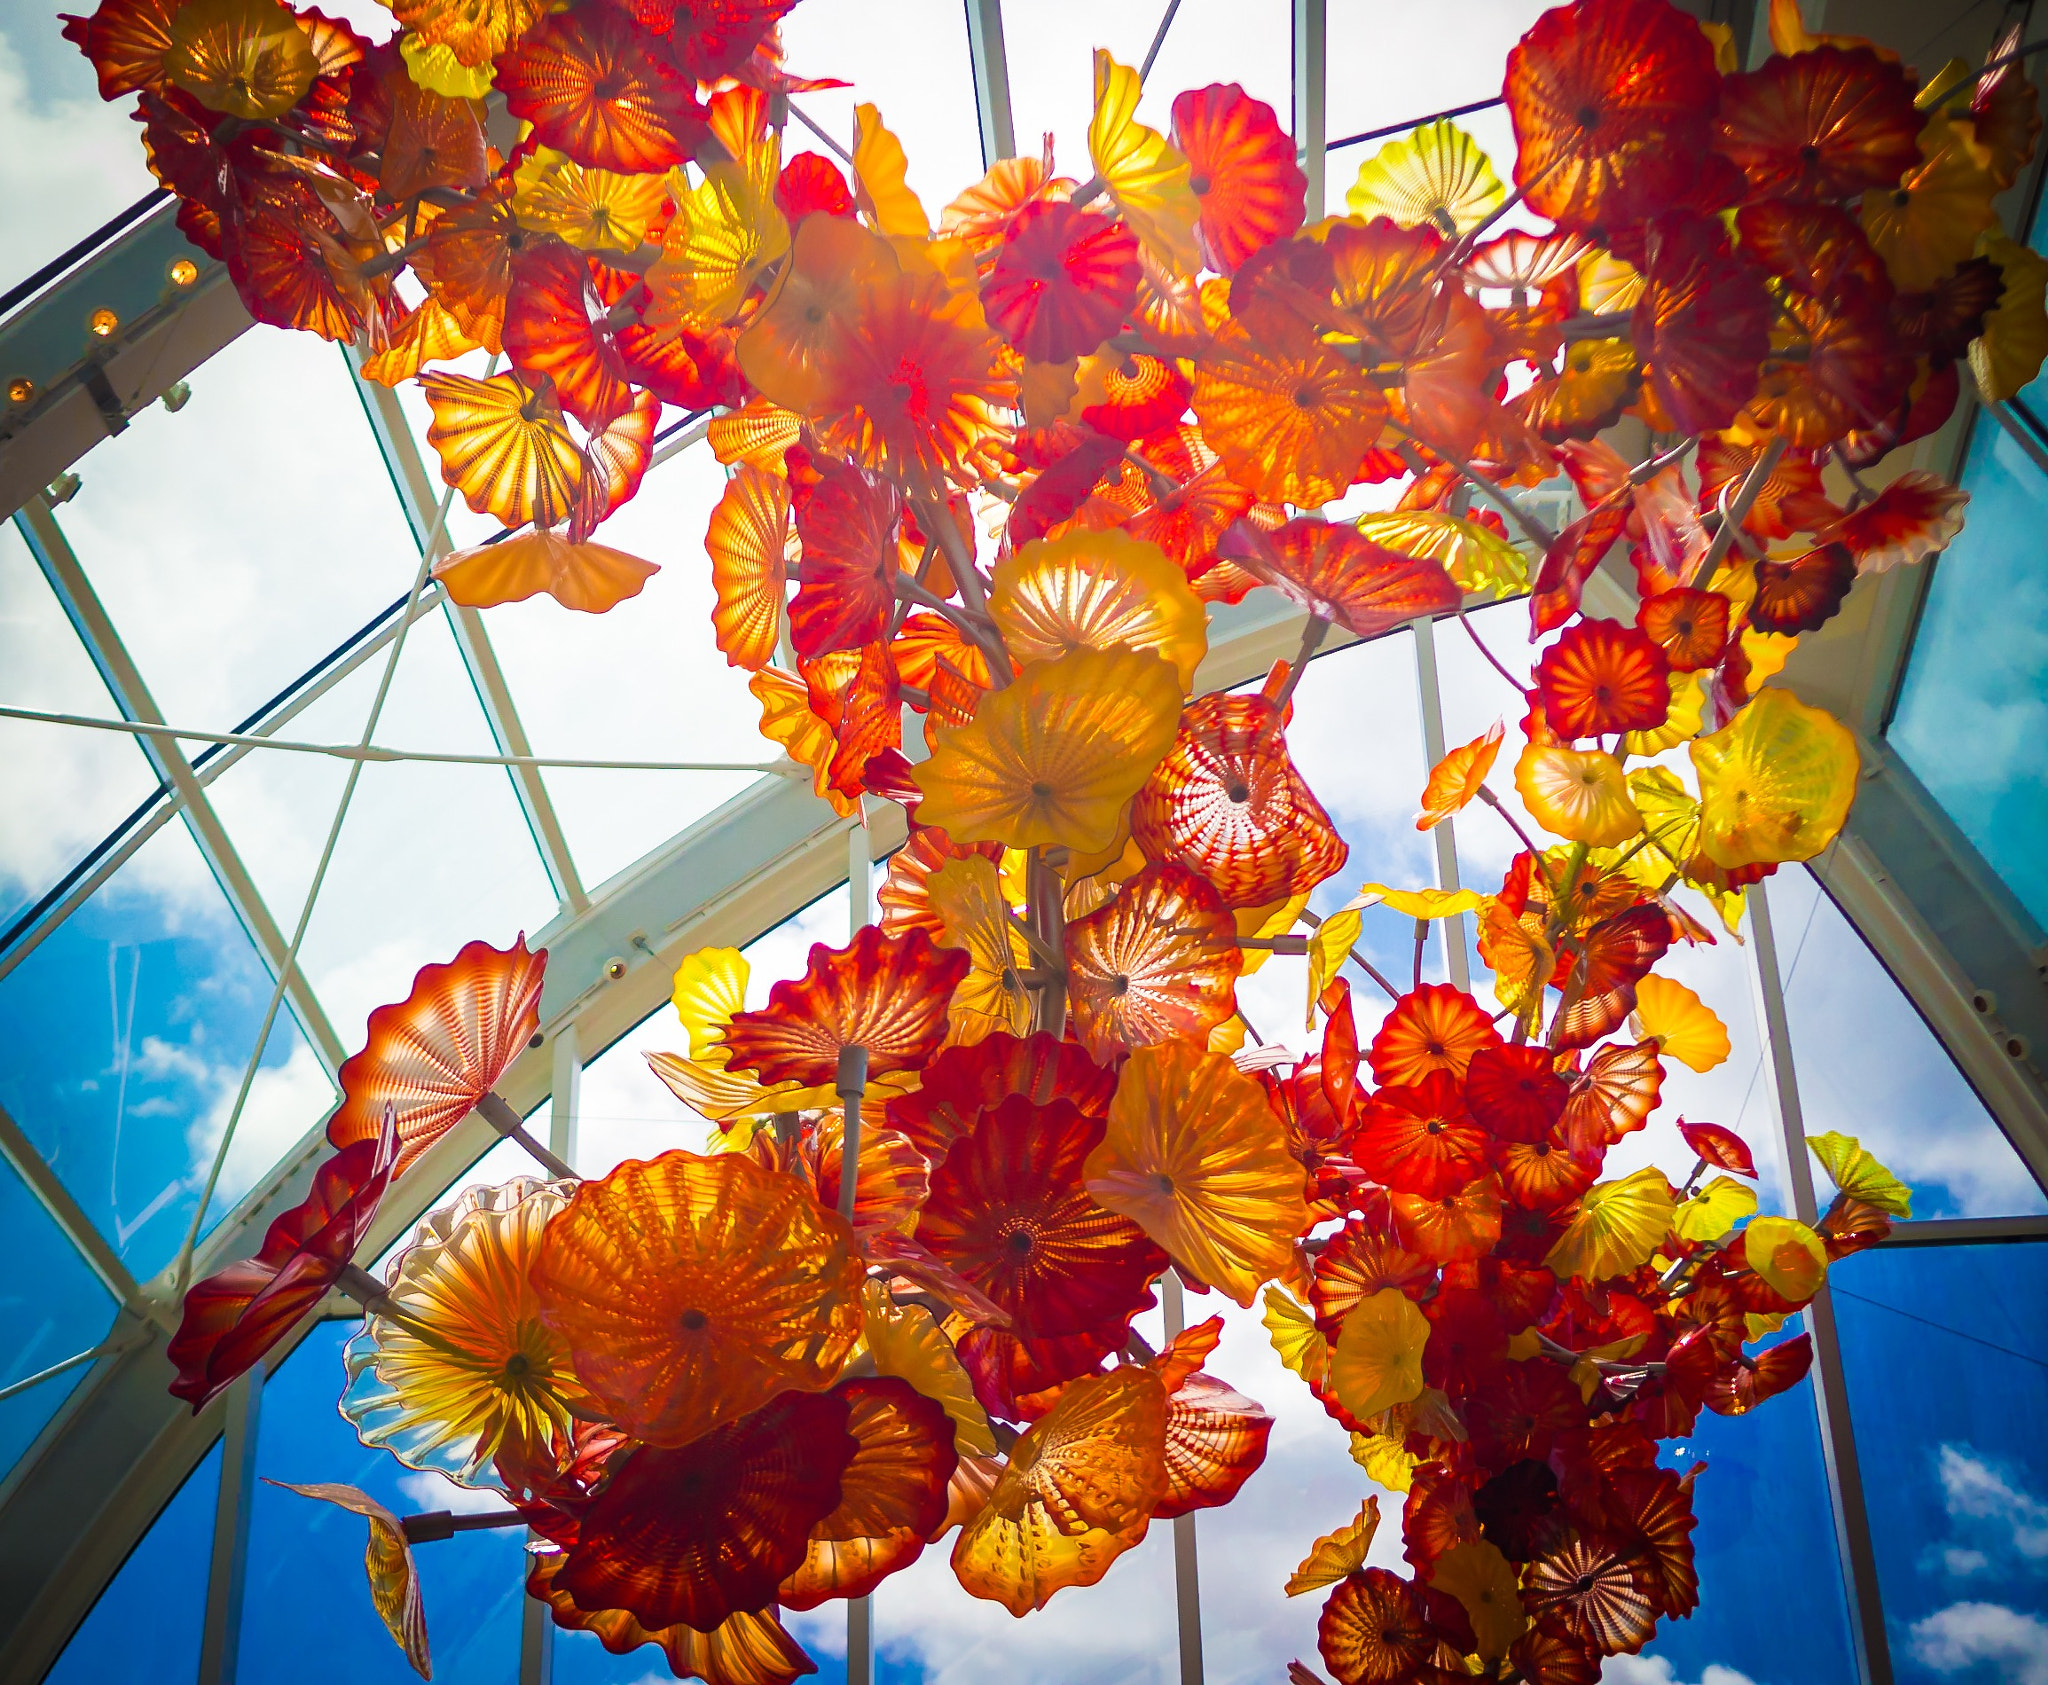 Olympus OM-D E-M10 + Panasonic Leica DG Summilux 25mm F1.4 II ASPH sample photo. Glass flowers, chihuly glass garden photography